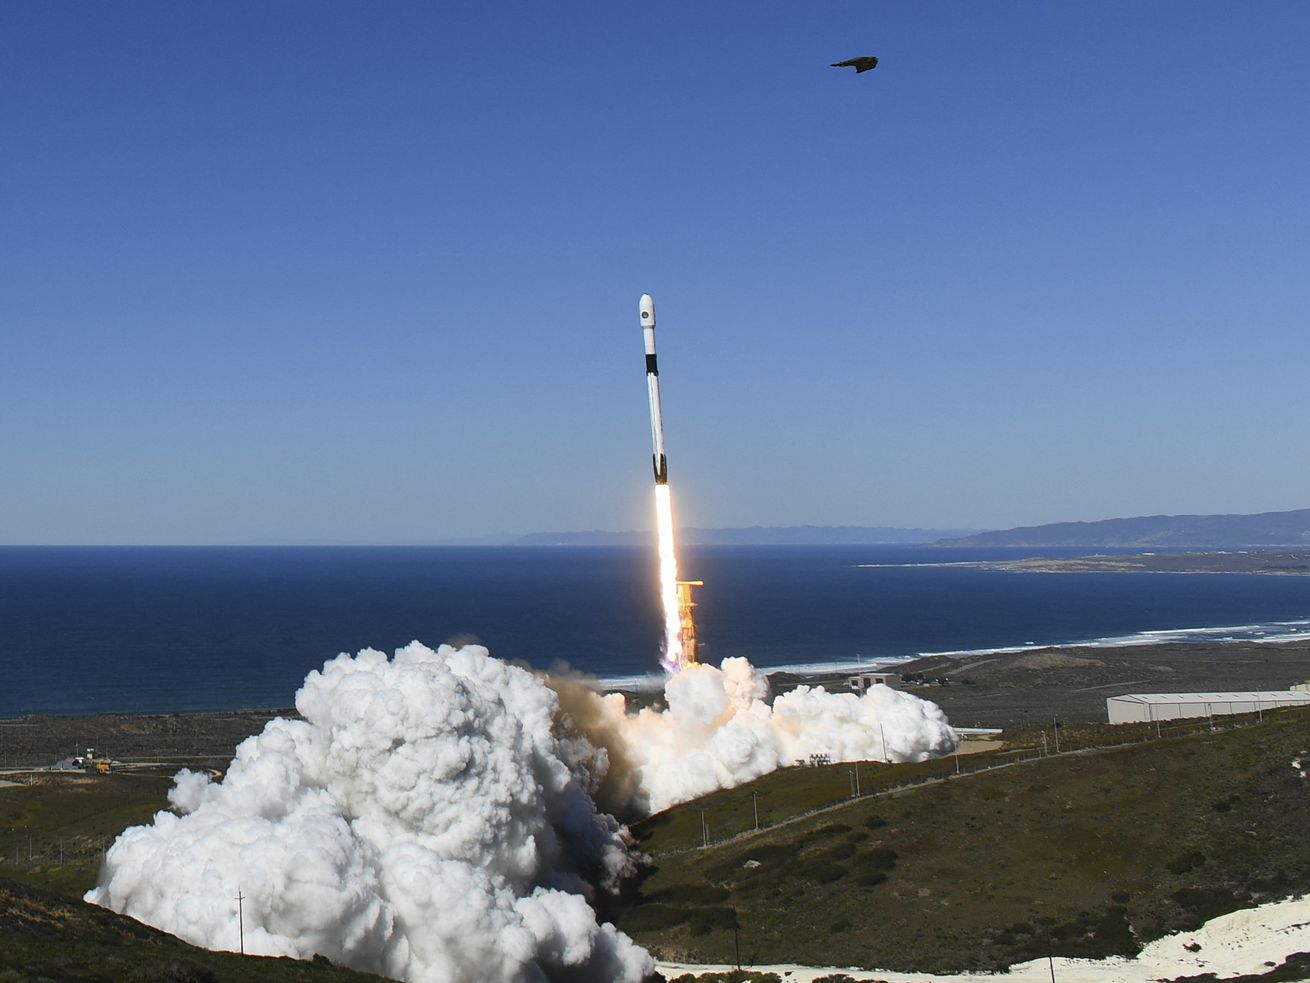 A SpaceX launches from the SLC-4E launch pad at Vandenberg US Space Force Base on February 2, 2022, in Lompoc, California.